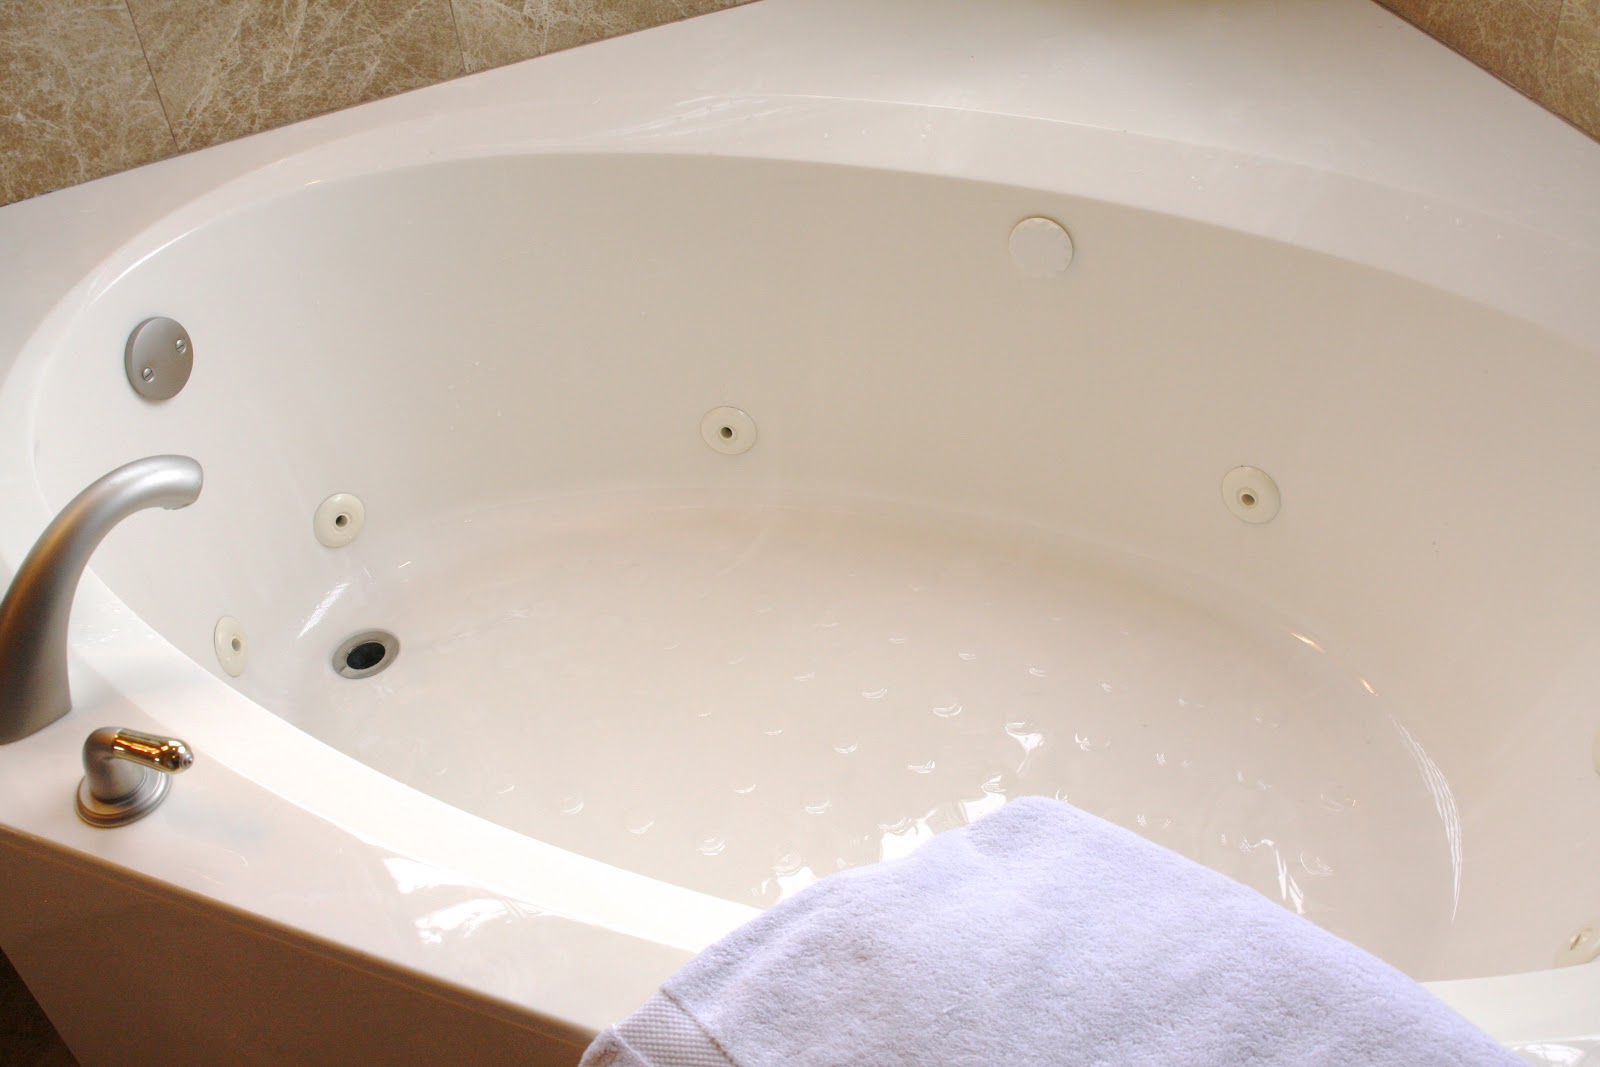 How To Clean Whirlpool Tub Jets, How To Remove Bathtub Jet Covers Kohler